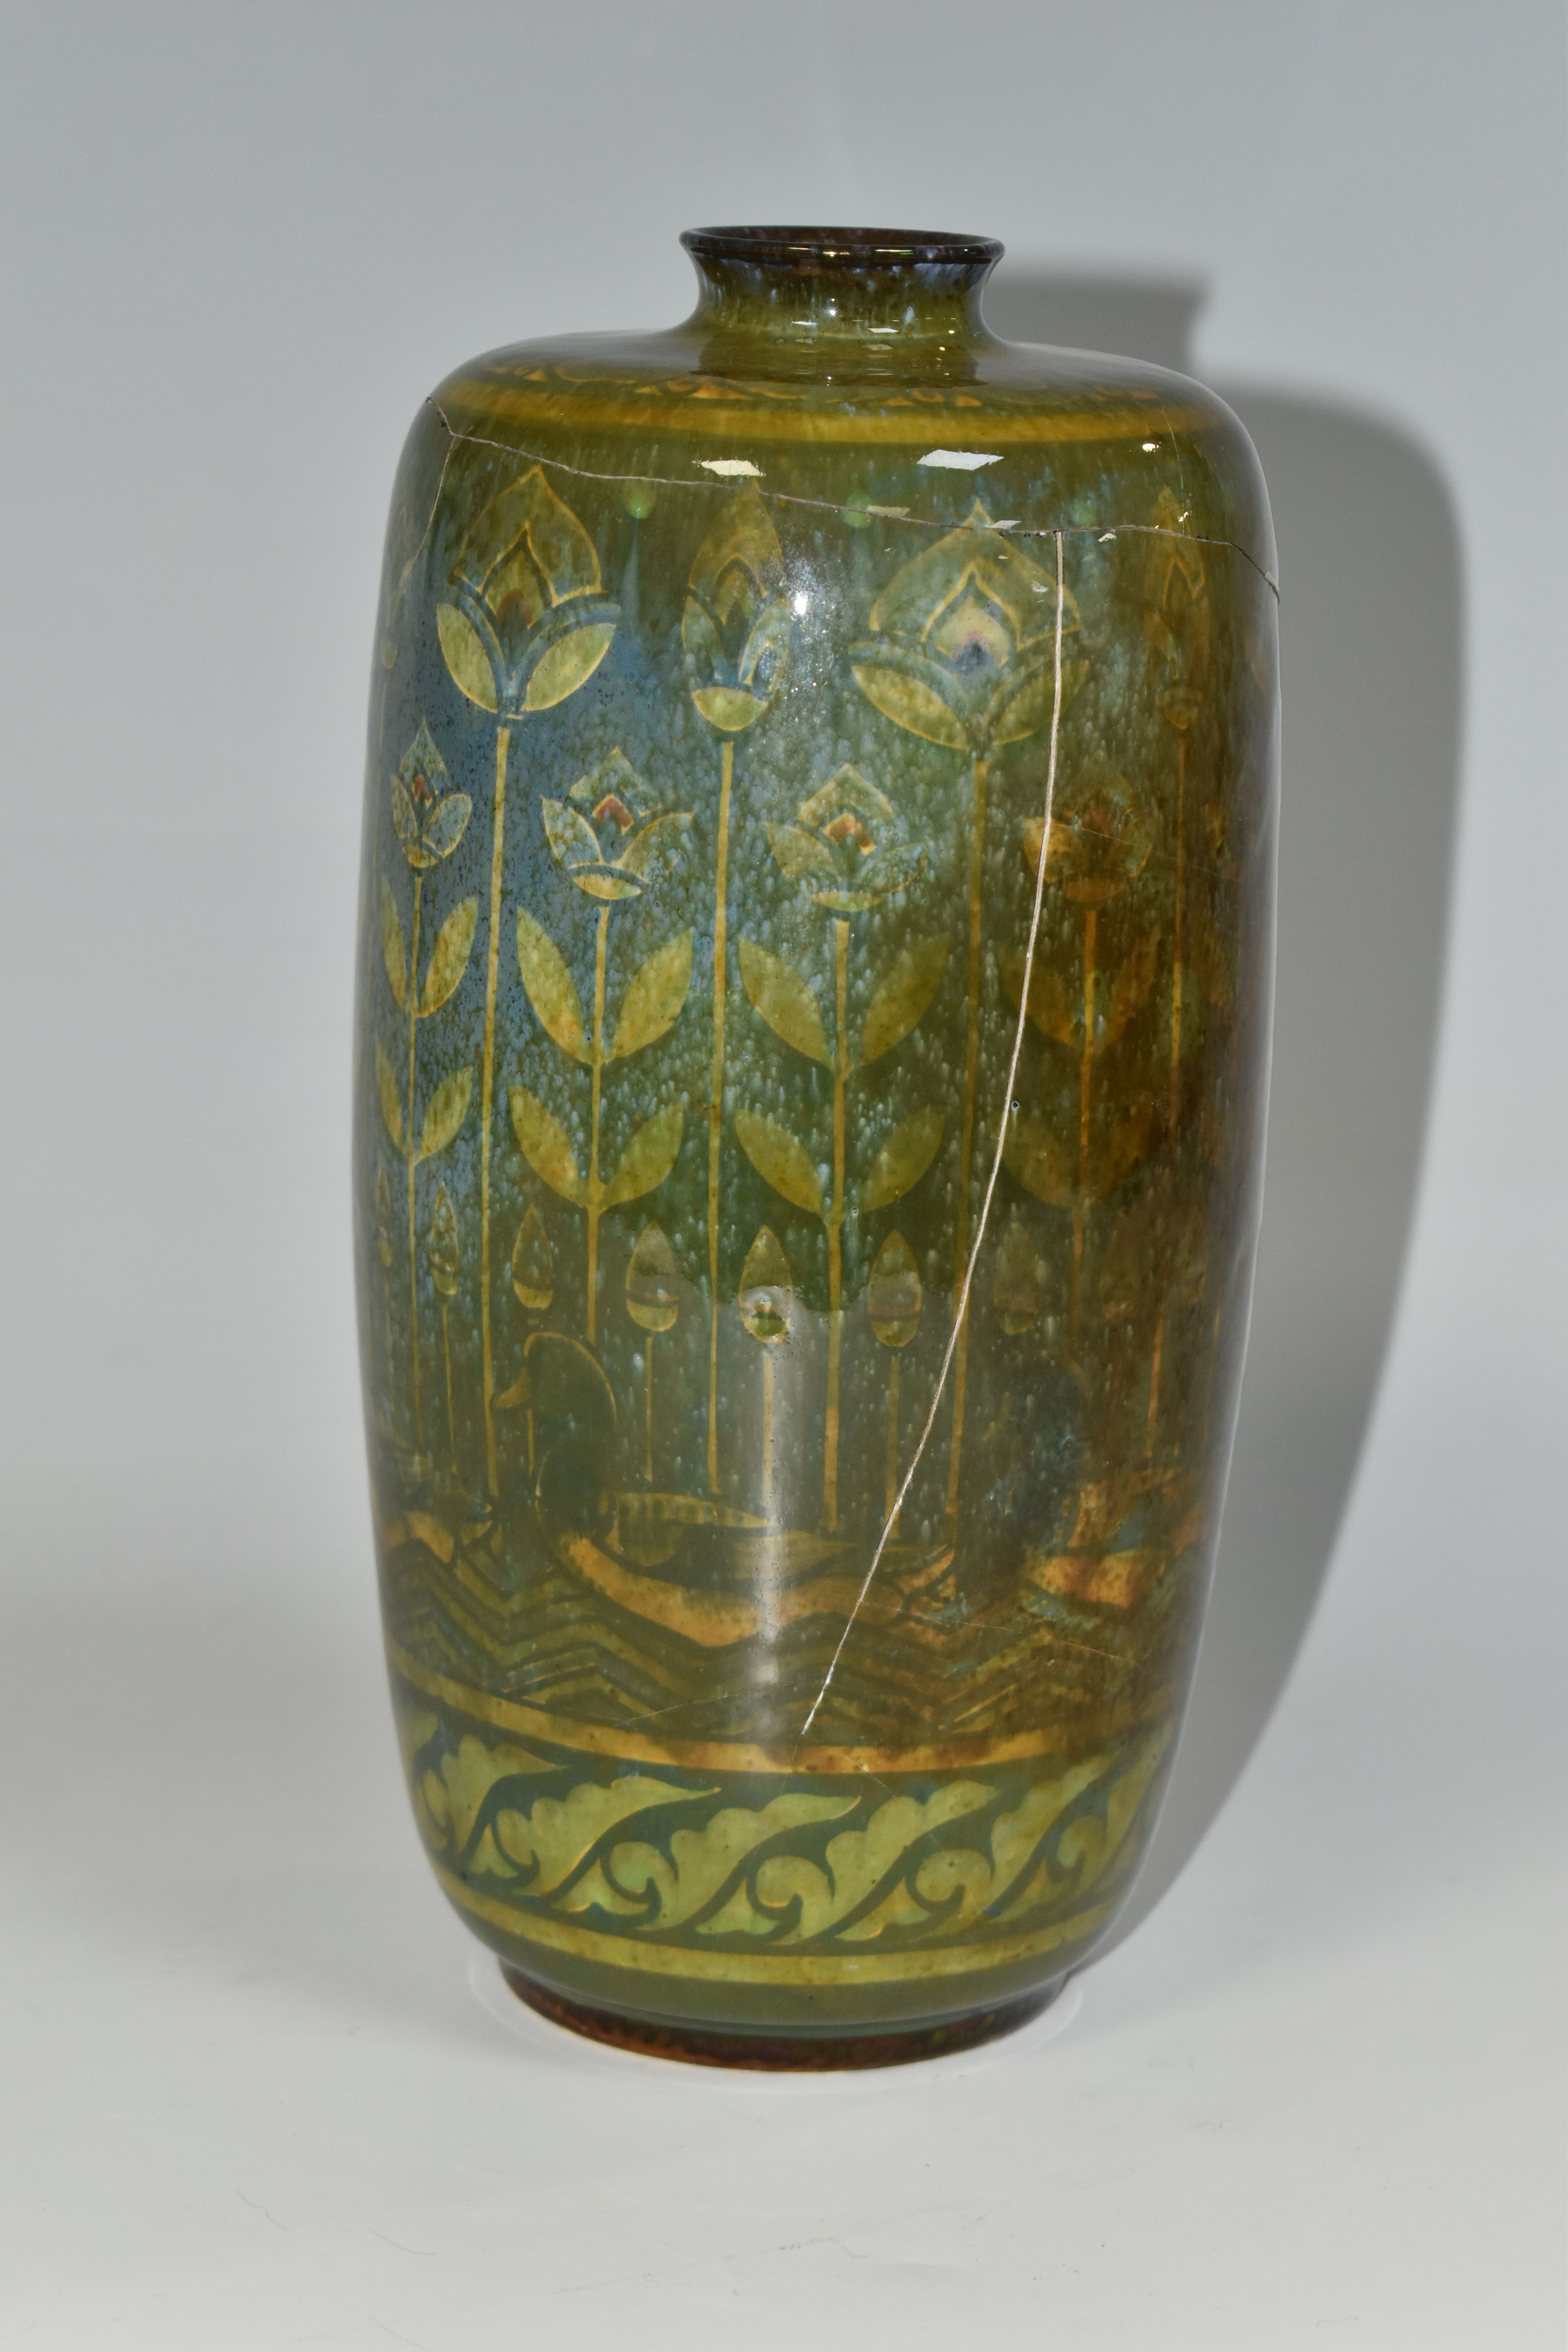 A PILKINGTON'S VASE, decorated with yellow stylized reeds and ducks on a mottled green ground, - Image 2 of 7